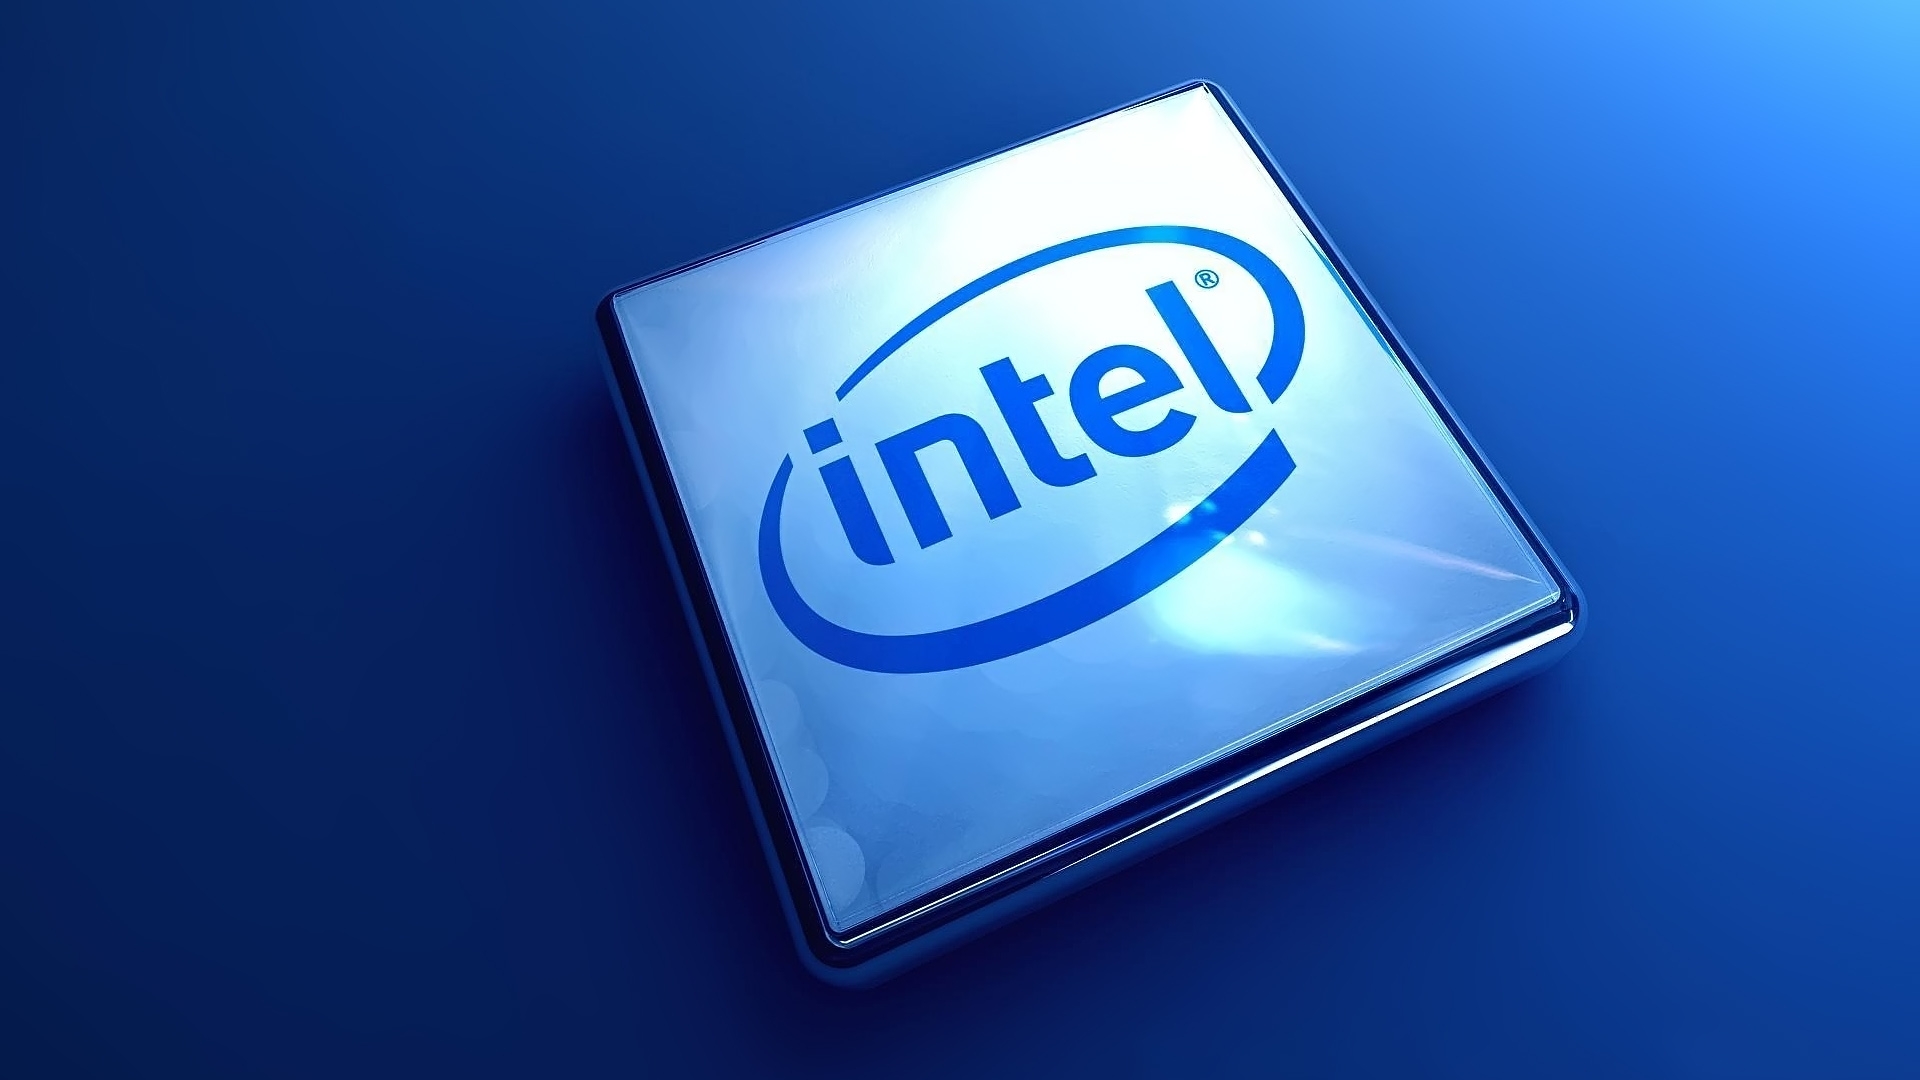 Intel 3d logo   High Definition Wallpapers   HD wallpapers